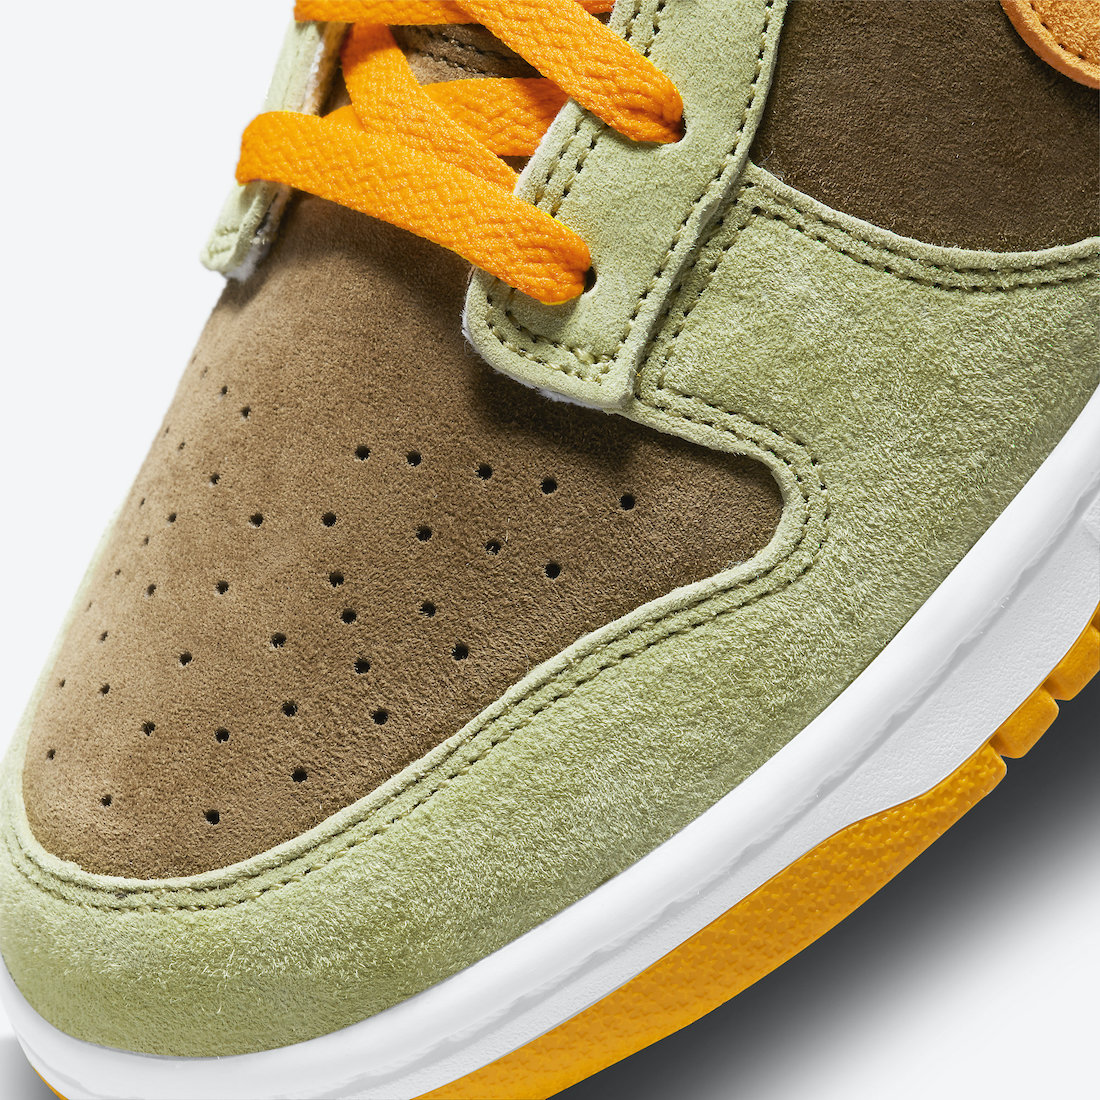 Nike-Dunk-Low-Dusty-Olive-Pro-Gold-DH5360-300-Release-Date-Price-6